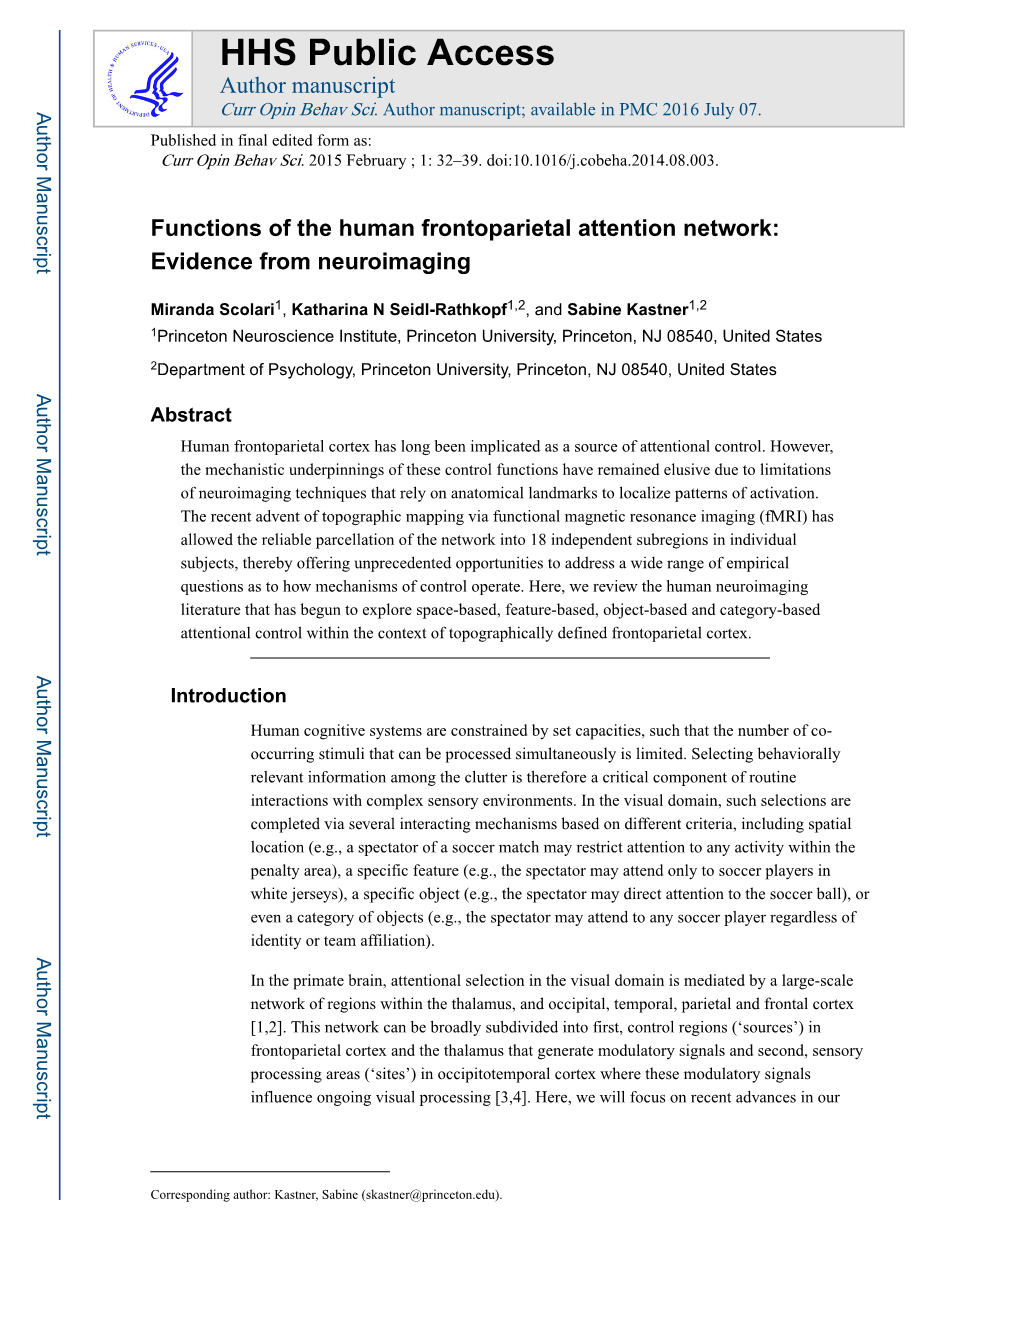 Functions of the Human Frontoparietal Attention Network: Evidence from Neuroimaging